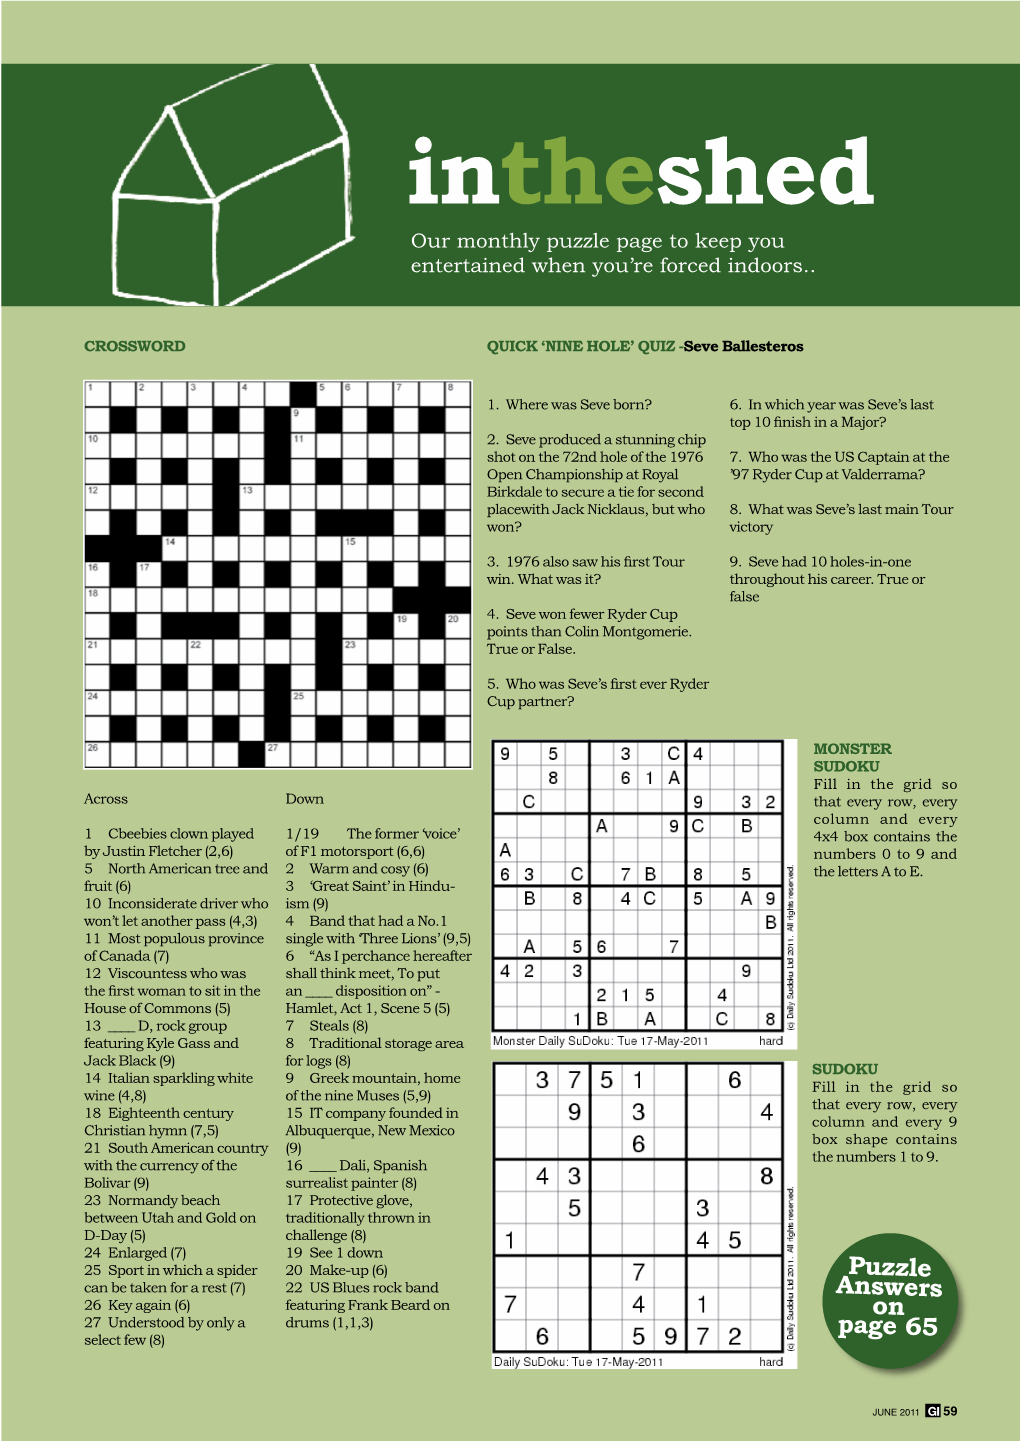 Intheshed Broad Our Monthly Puzzle Page to Keep You Working a Entertained When You’Re Forced Indoors